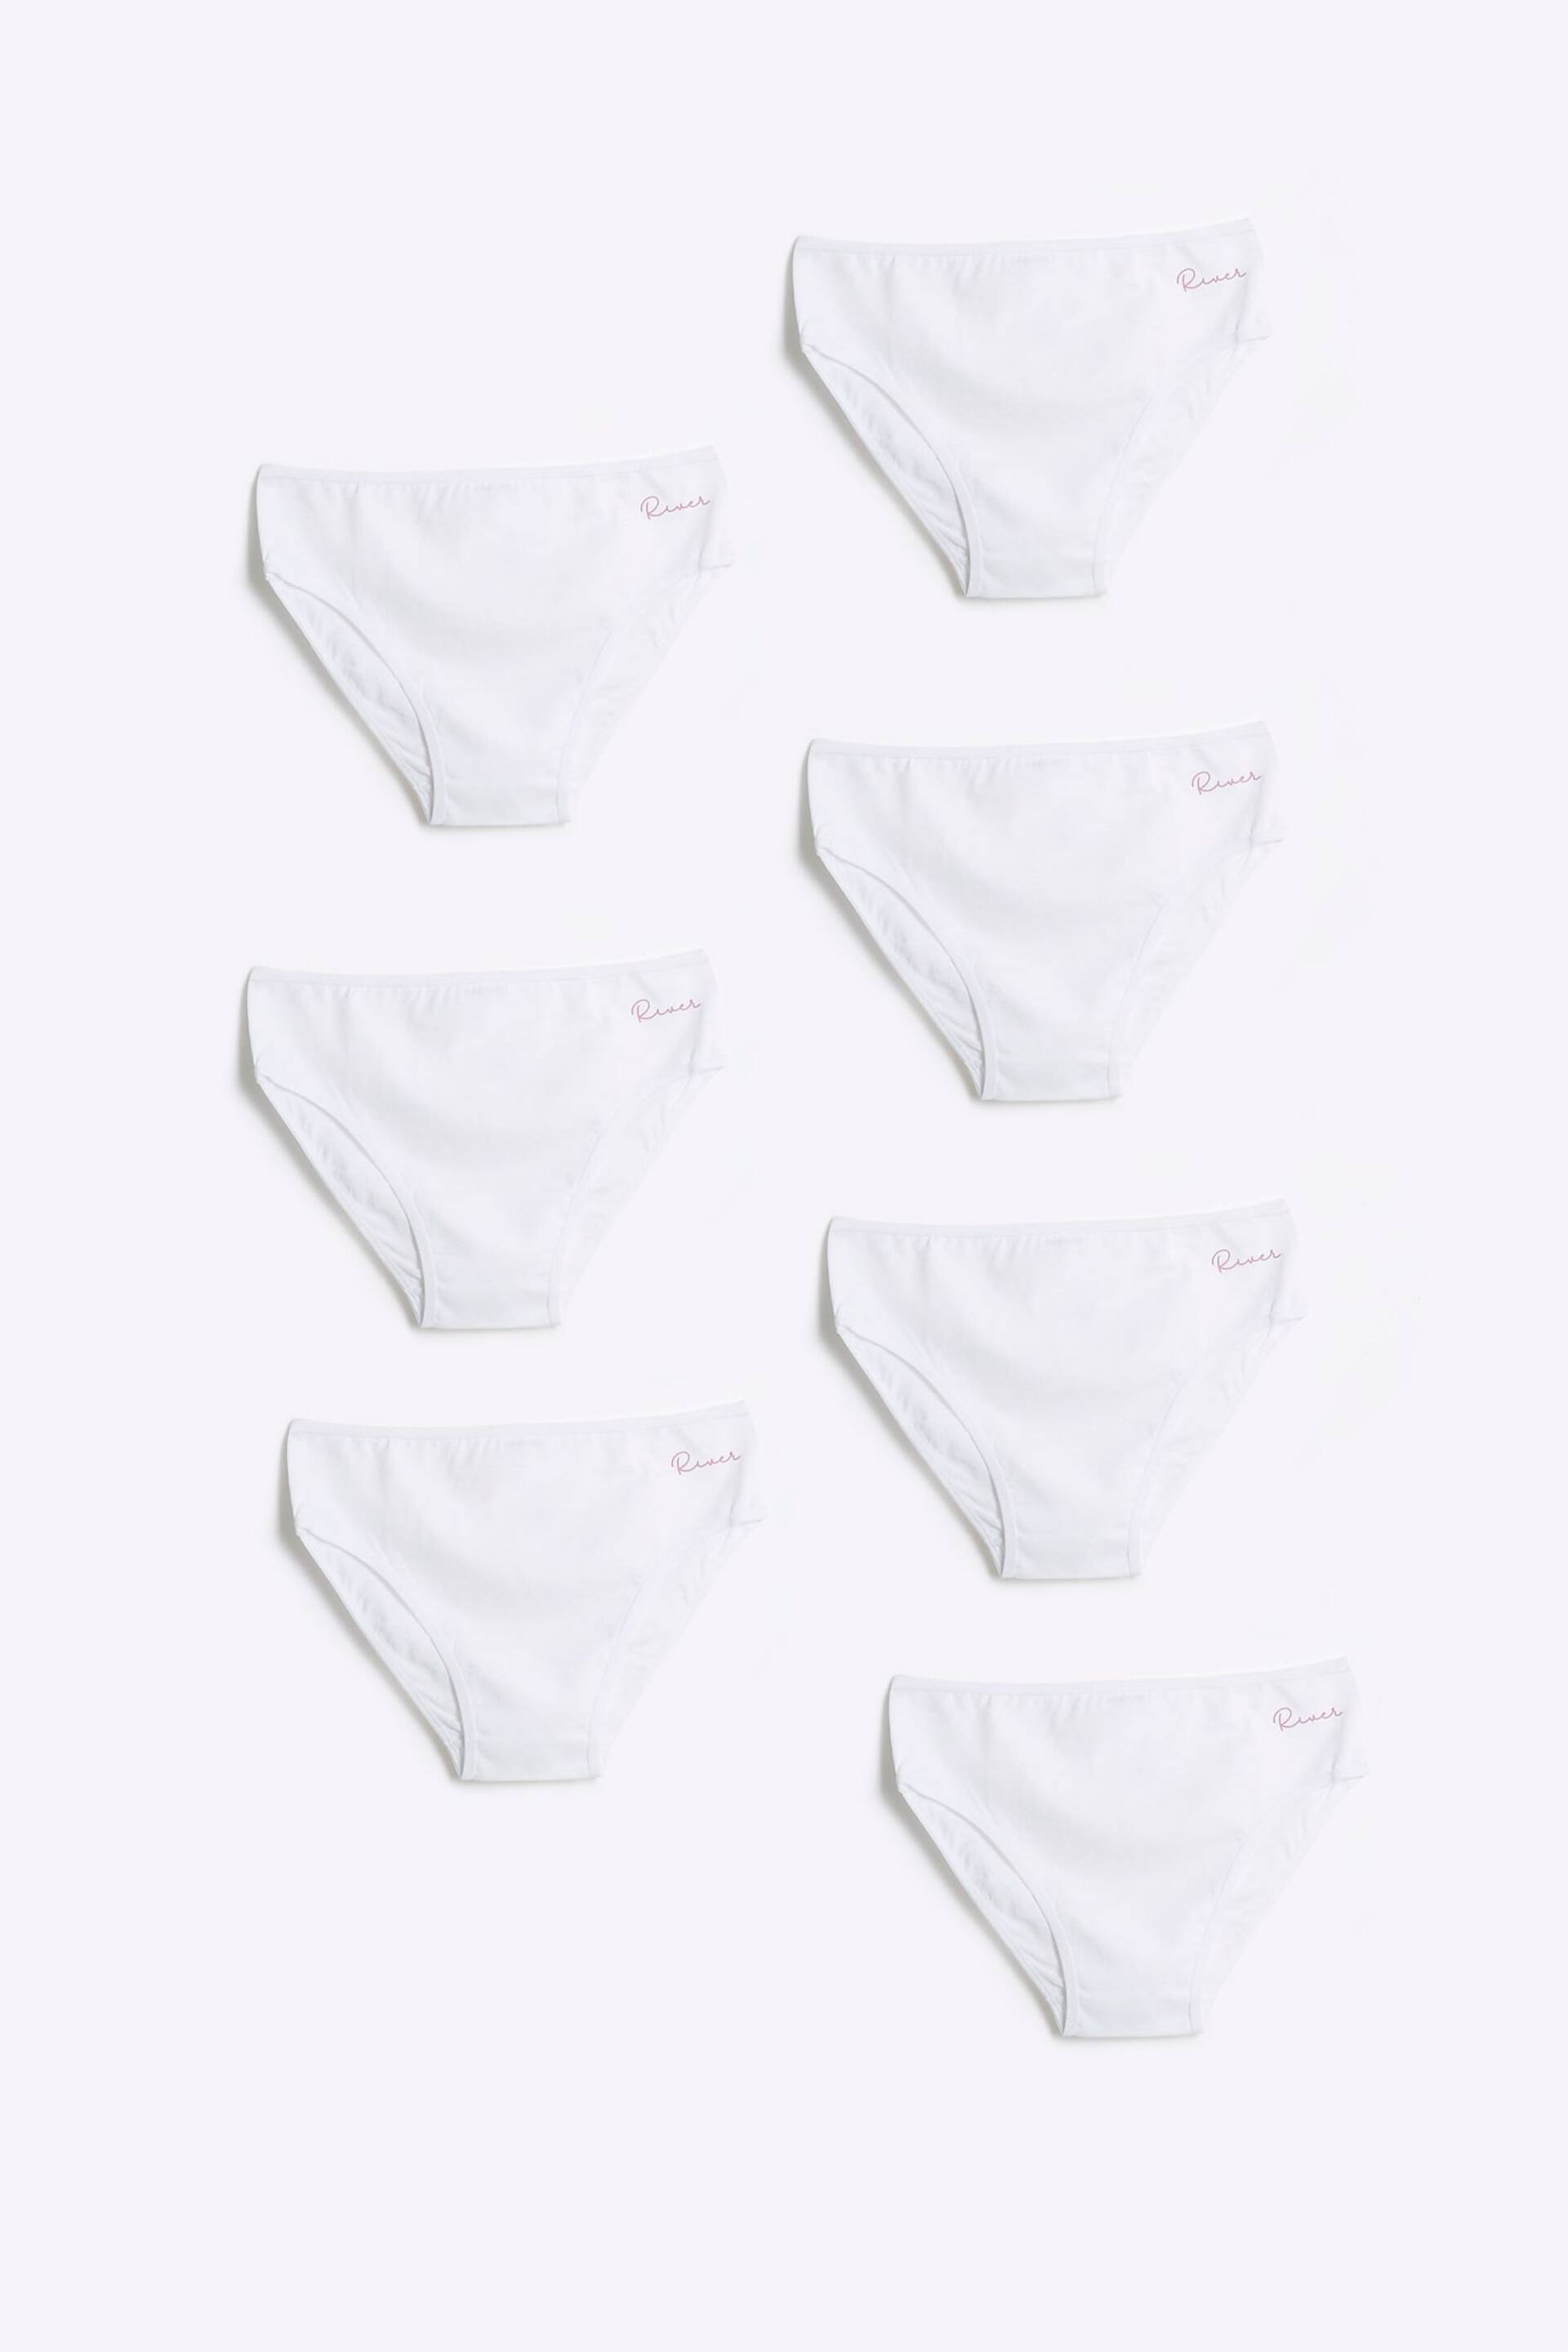 River Island White Girls Briefs 7 Pack - Image 1 of 3